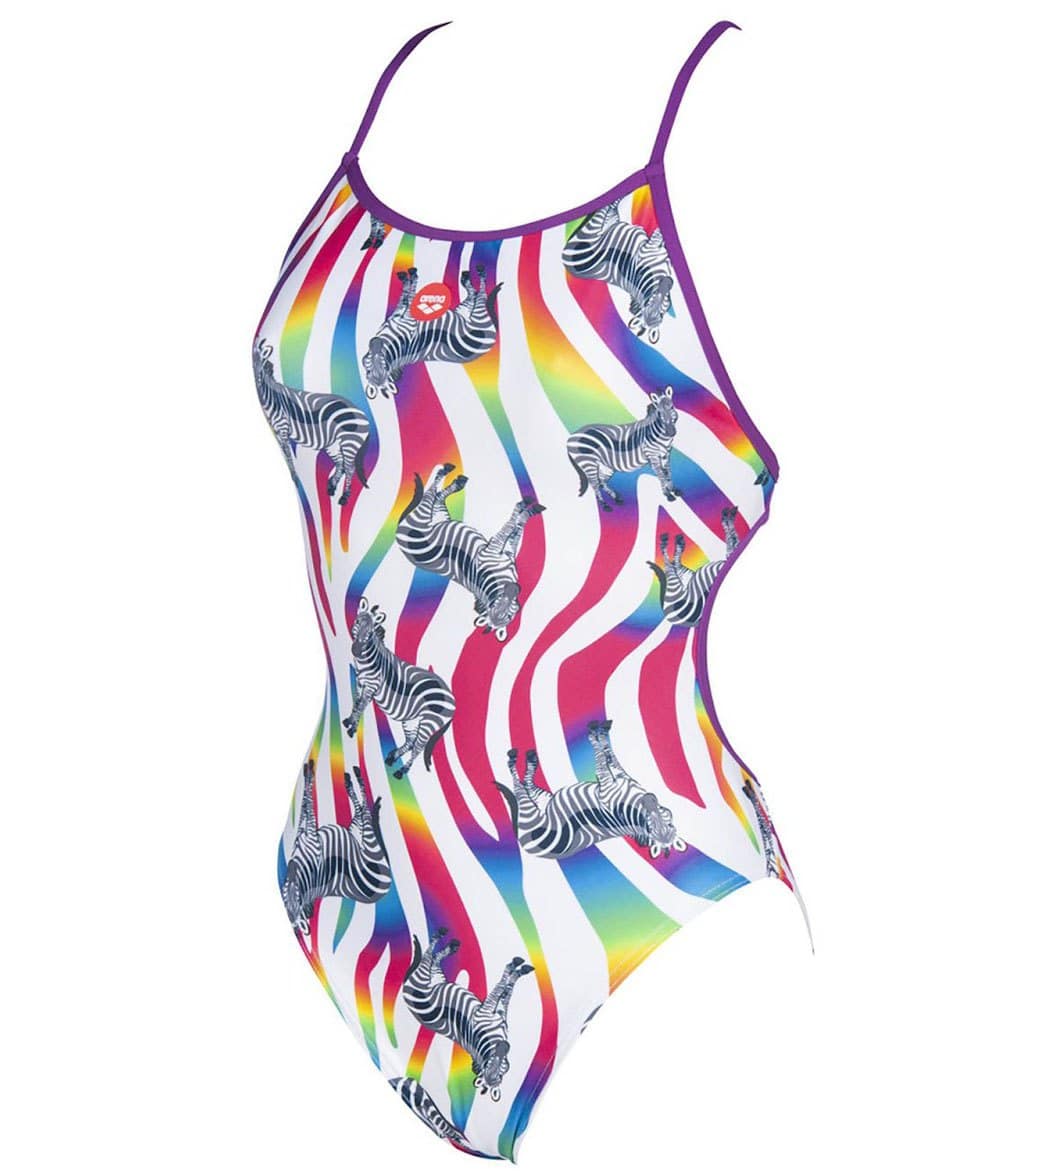 Arena Women's Crazy Zebras Lace Back One Piece Swimsuit - Provenza/Multi 22 Polyester - Swimoutlet.com